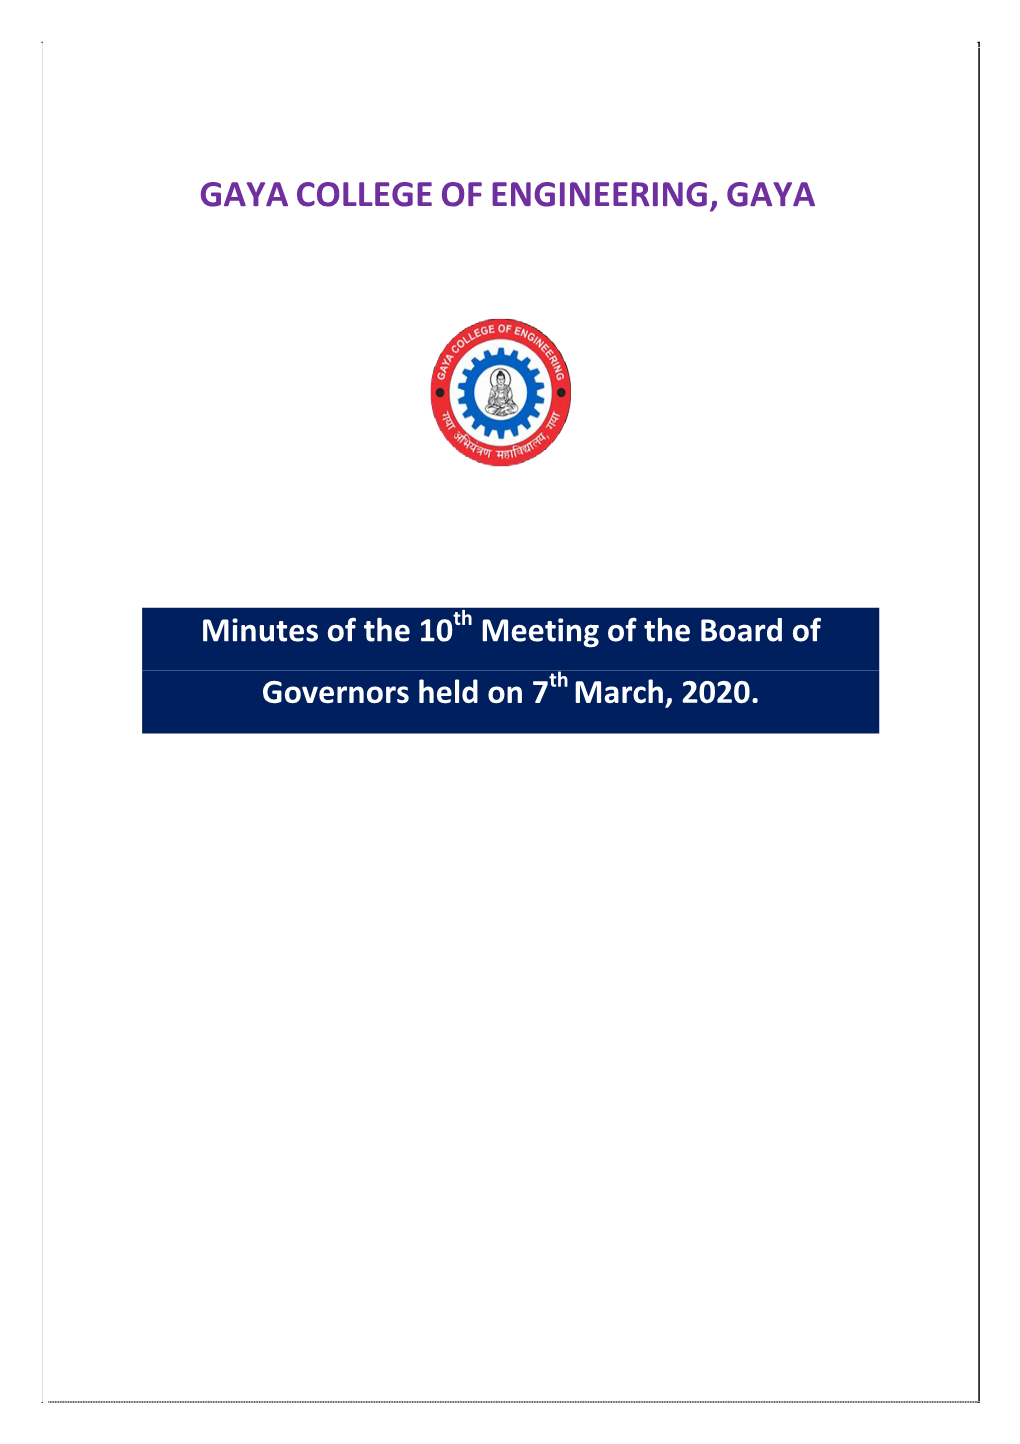 Meeting of the Board of Governors Held on 7Th March, 2020